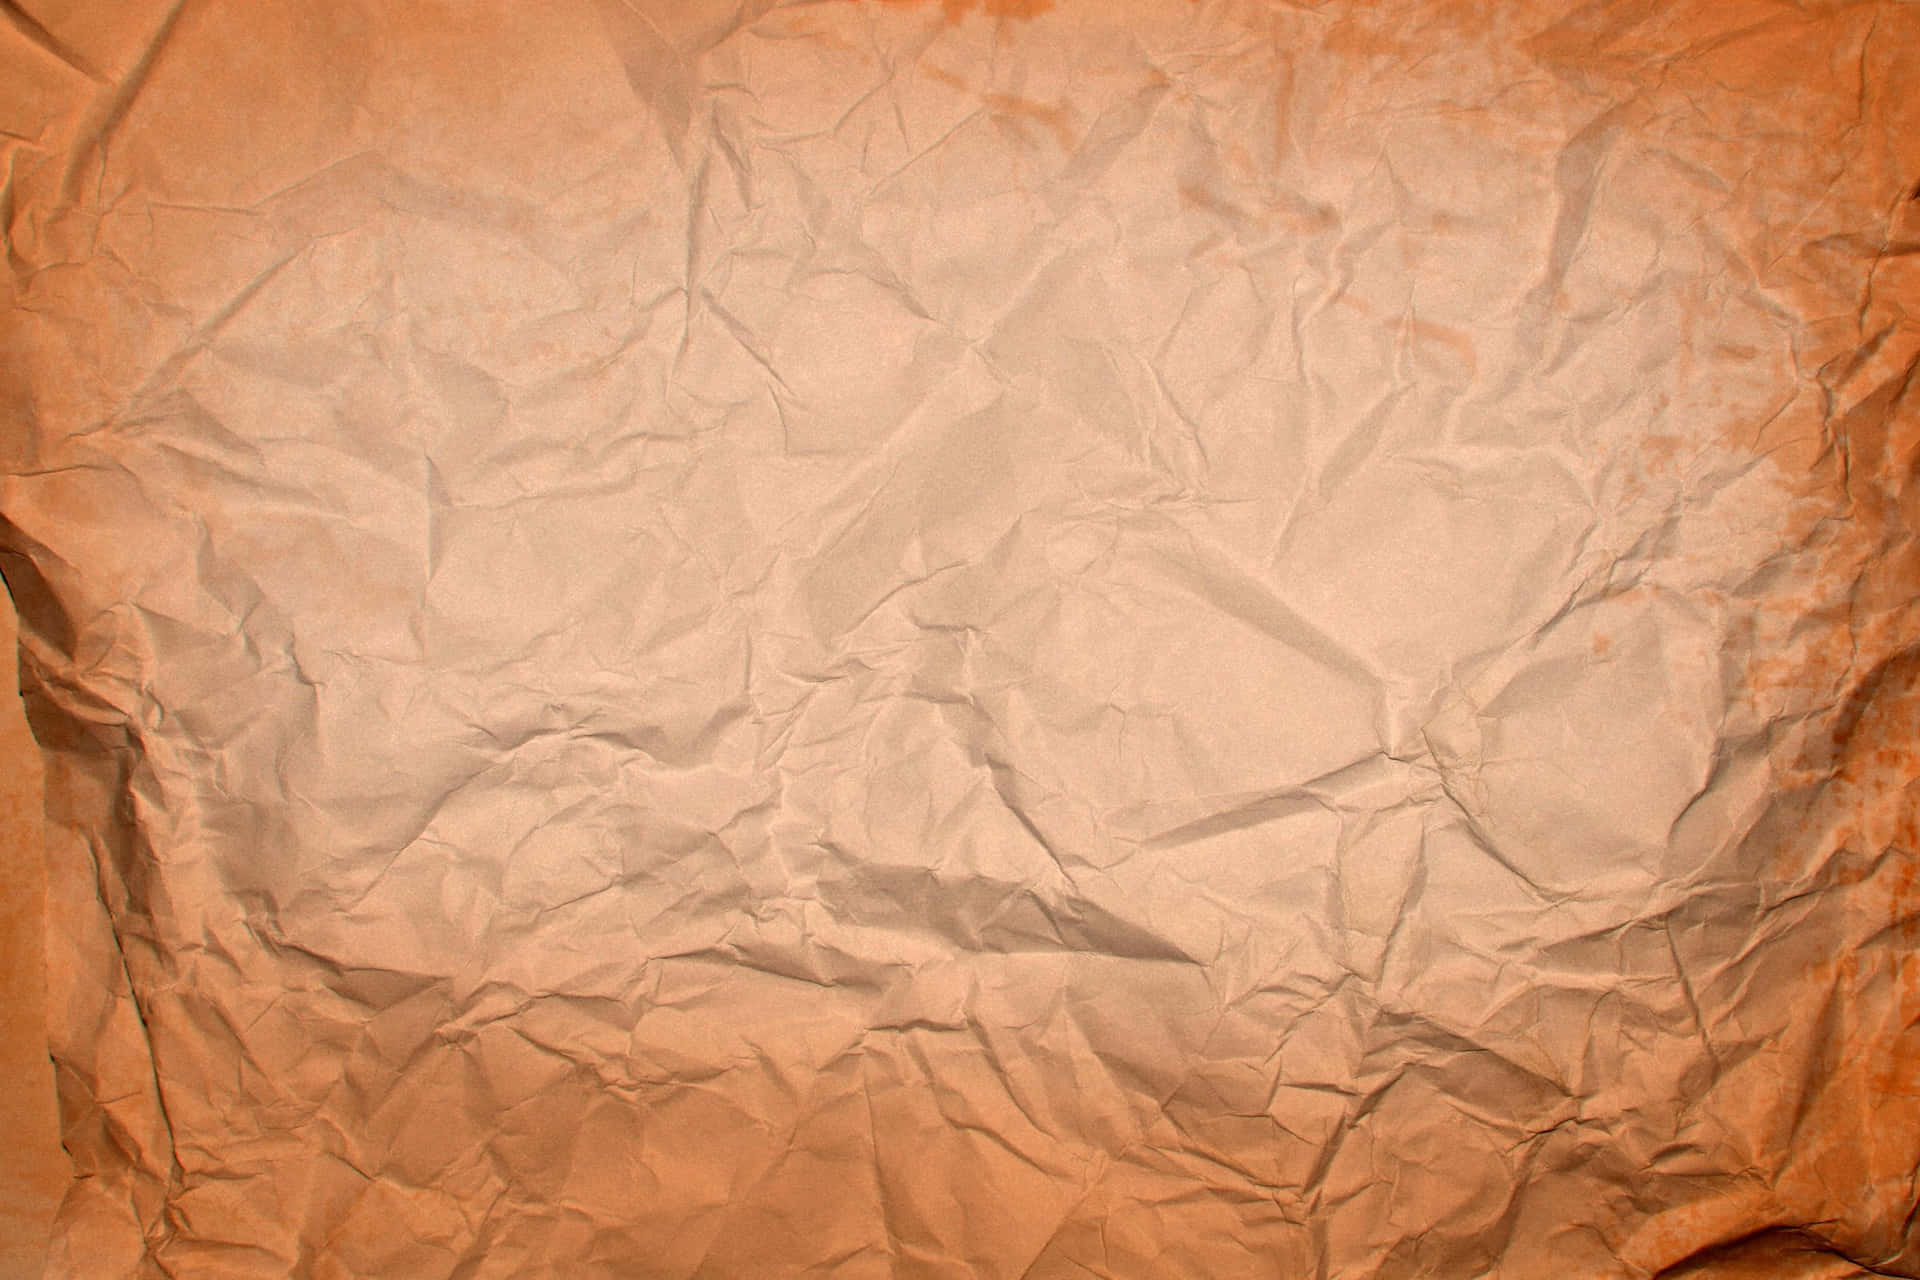 A Brown Paper Background With Crumpled Paper